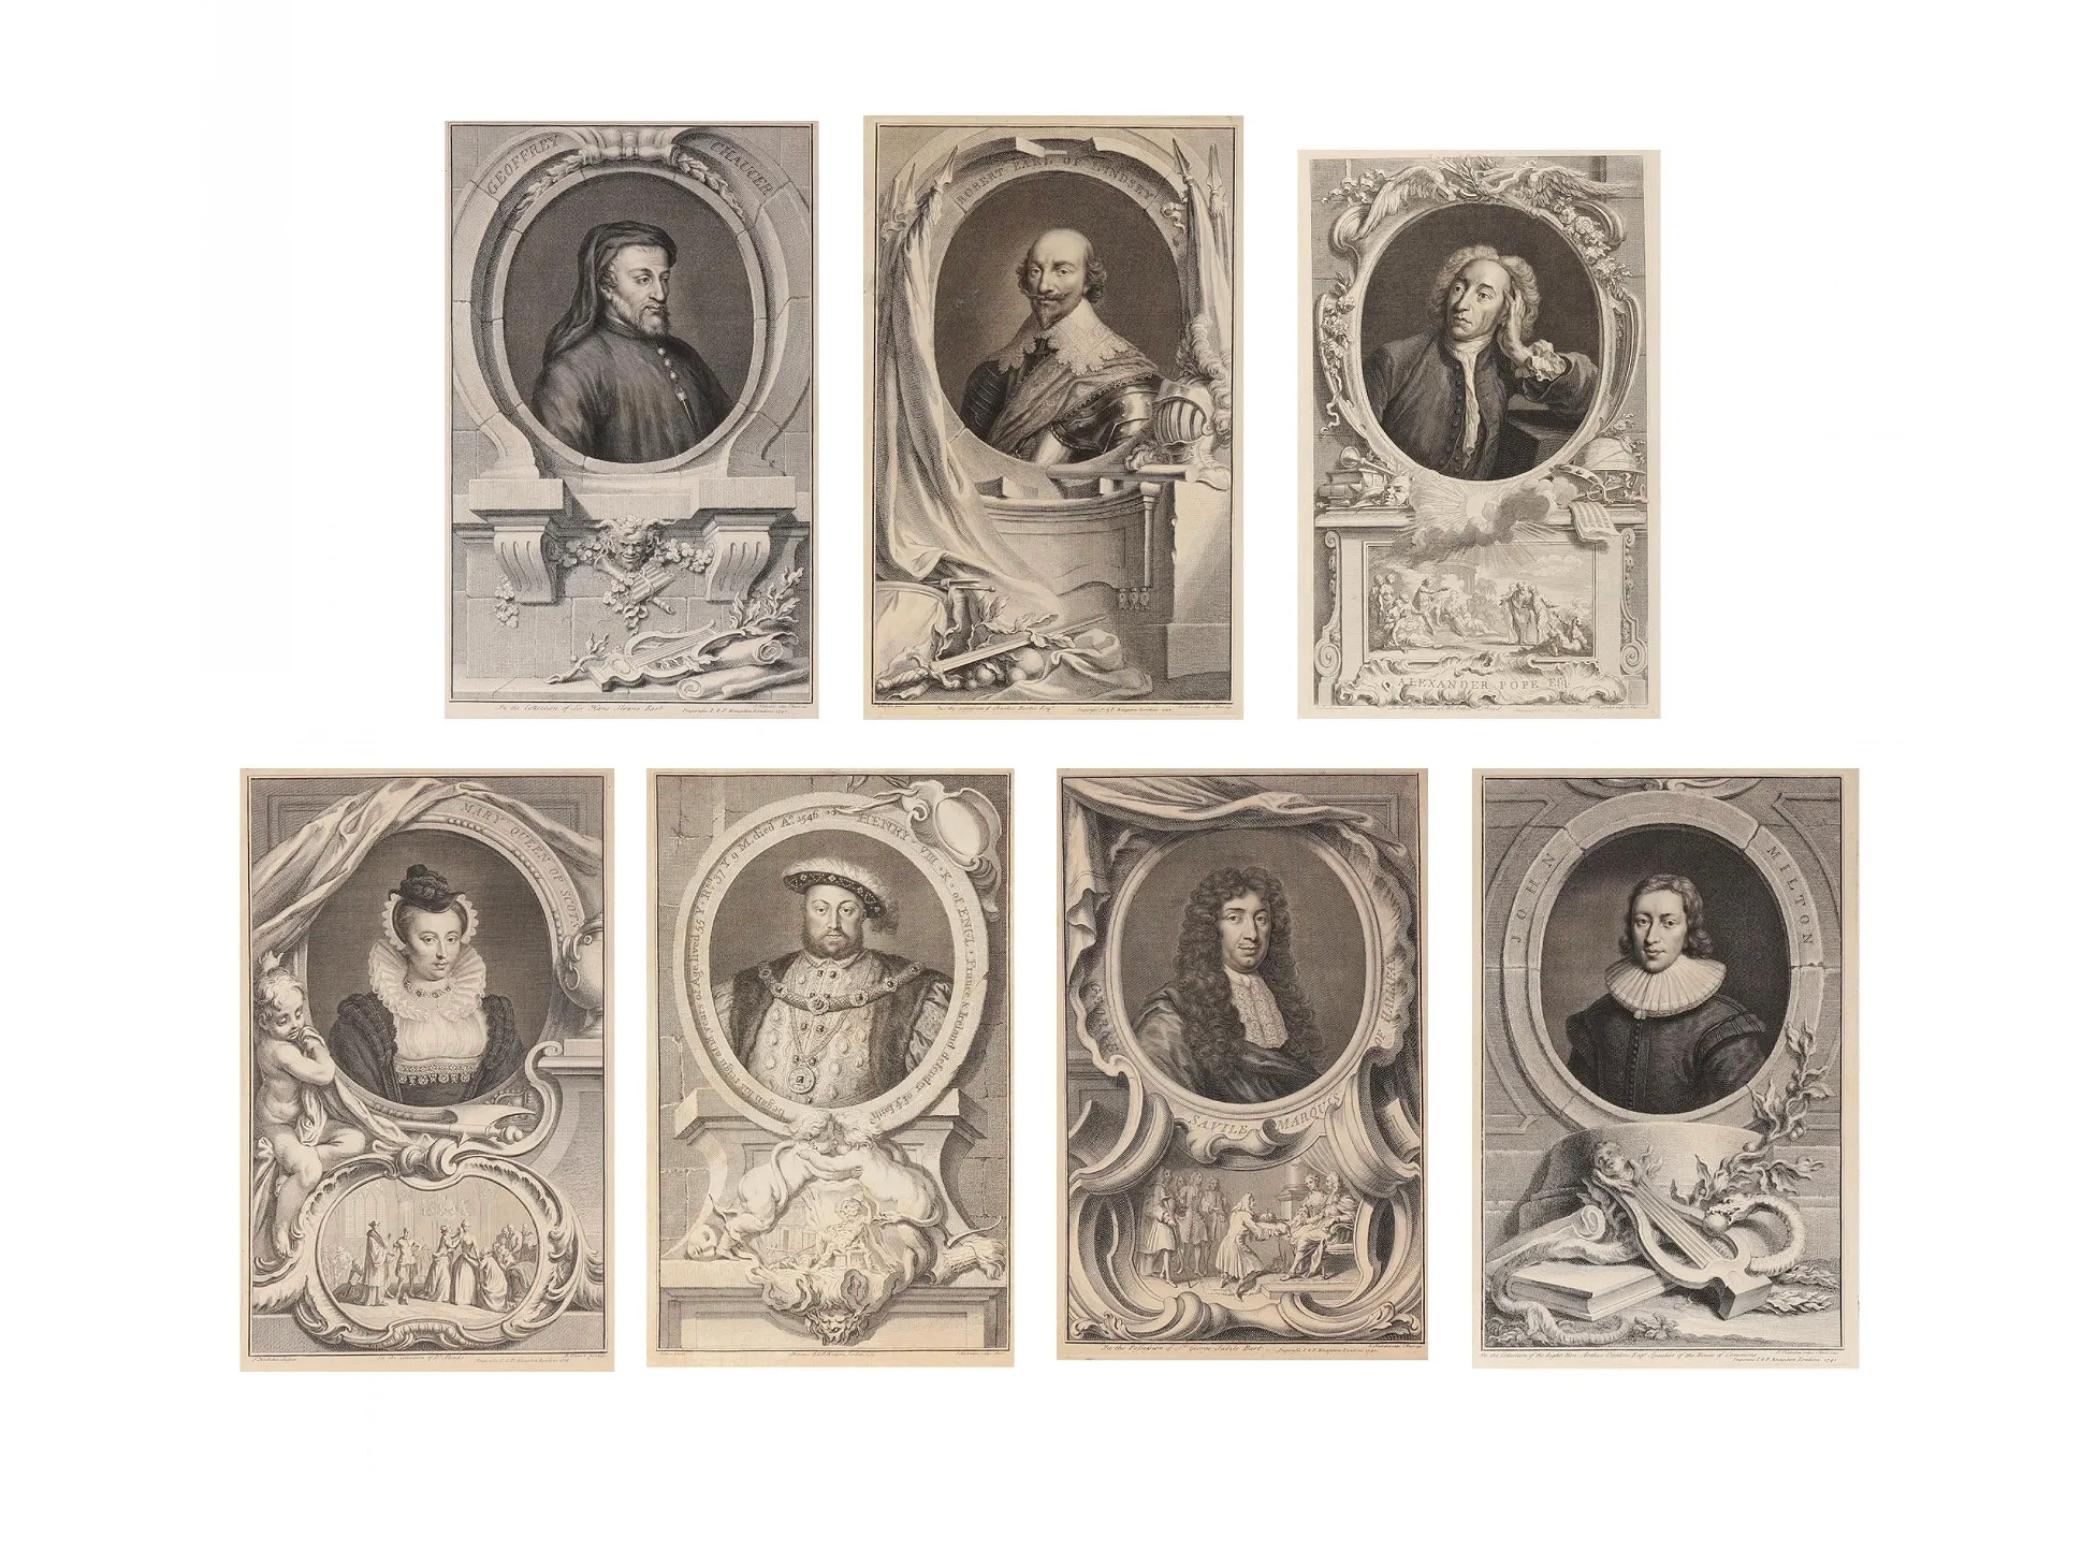 Jacobus Houbraken (Dutch, 1698-1780), Seven Portraits From Heads of Illustrious Persons of Great Britain

Each an engraving on laid or wove paper, published 1743 to 1752, includes Geoffrey Chaucer, Henry VIII, Mary Queen of Scots, Savile Marquis,